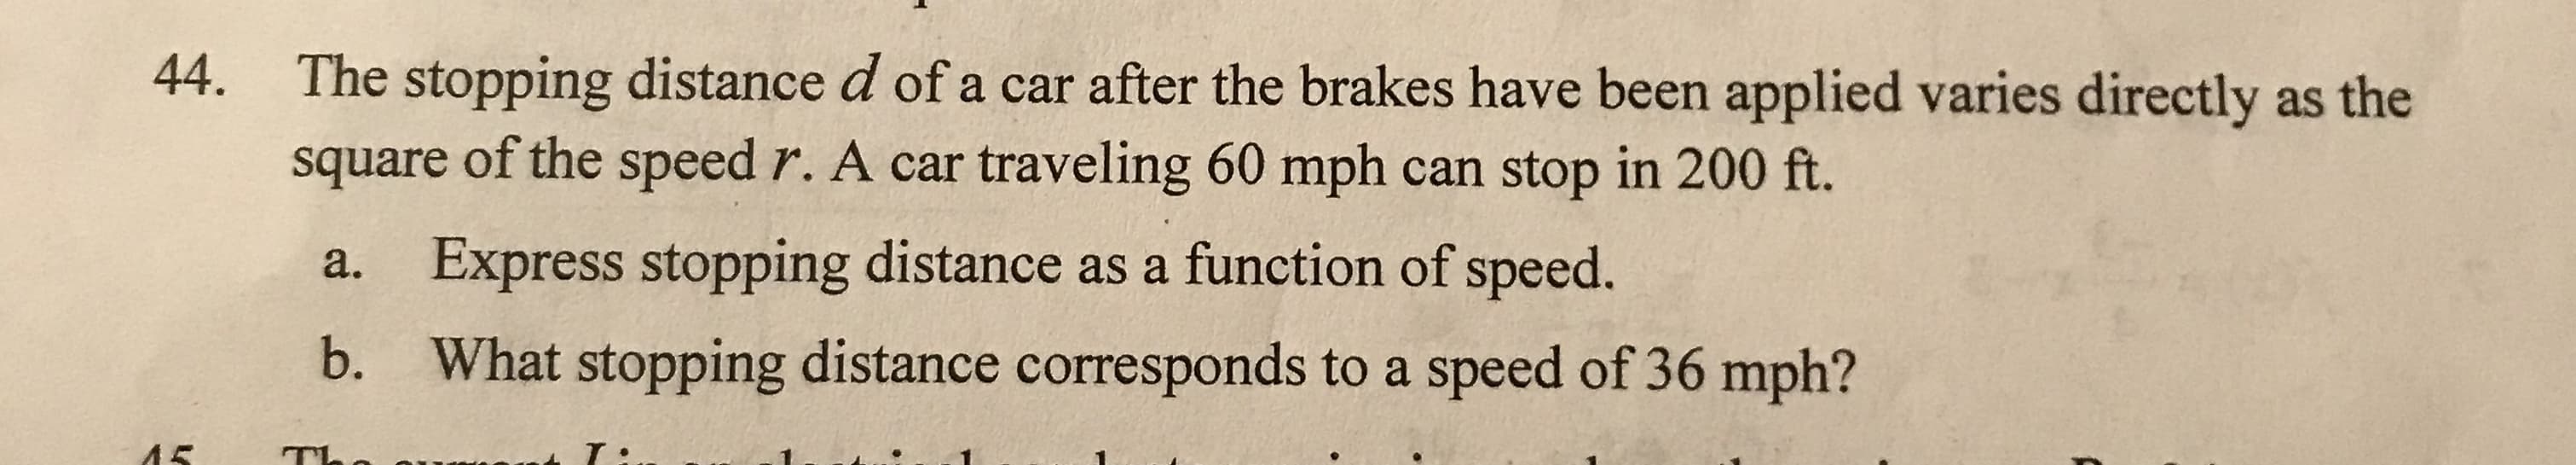 The stopping distance d of a car after the brakes have been applied varies directly as the
square of the speed r. A car traveling 60 mph can stop in 200 ft.
44.
Express stopping distance as a function of speed.
a.
What stopping distance corresponds to a speed of 36 mph?
b.
ЛЕ
